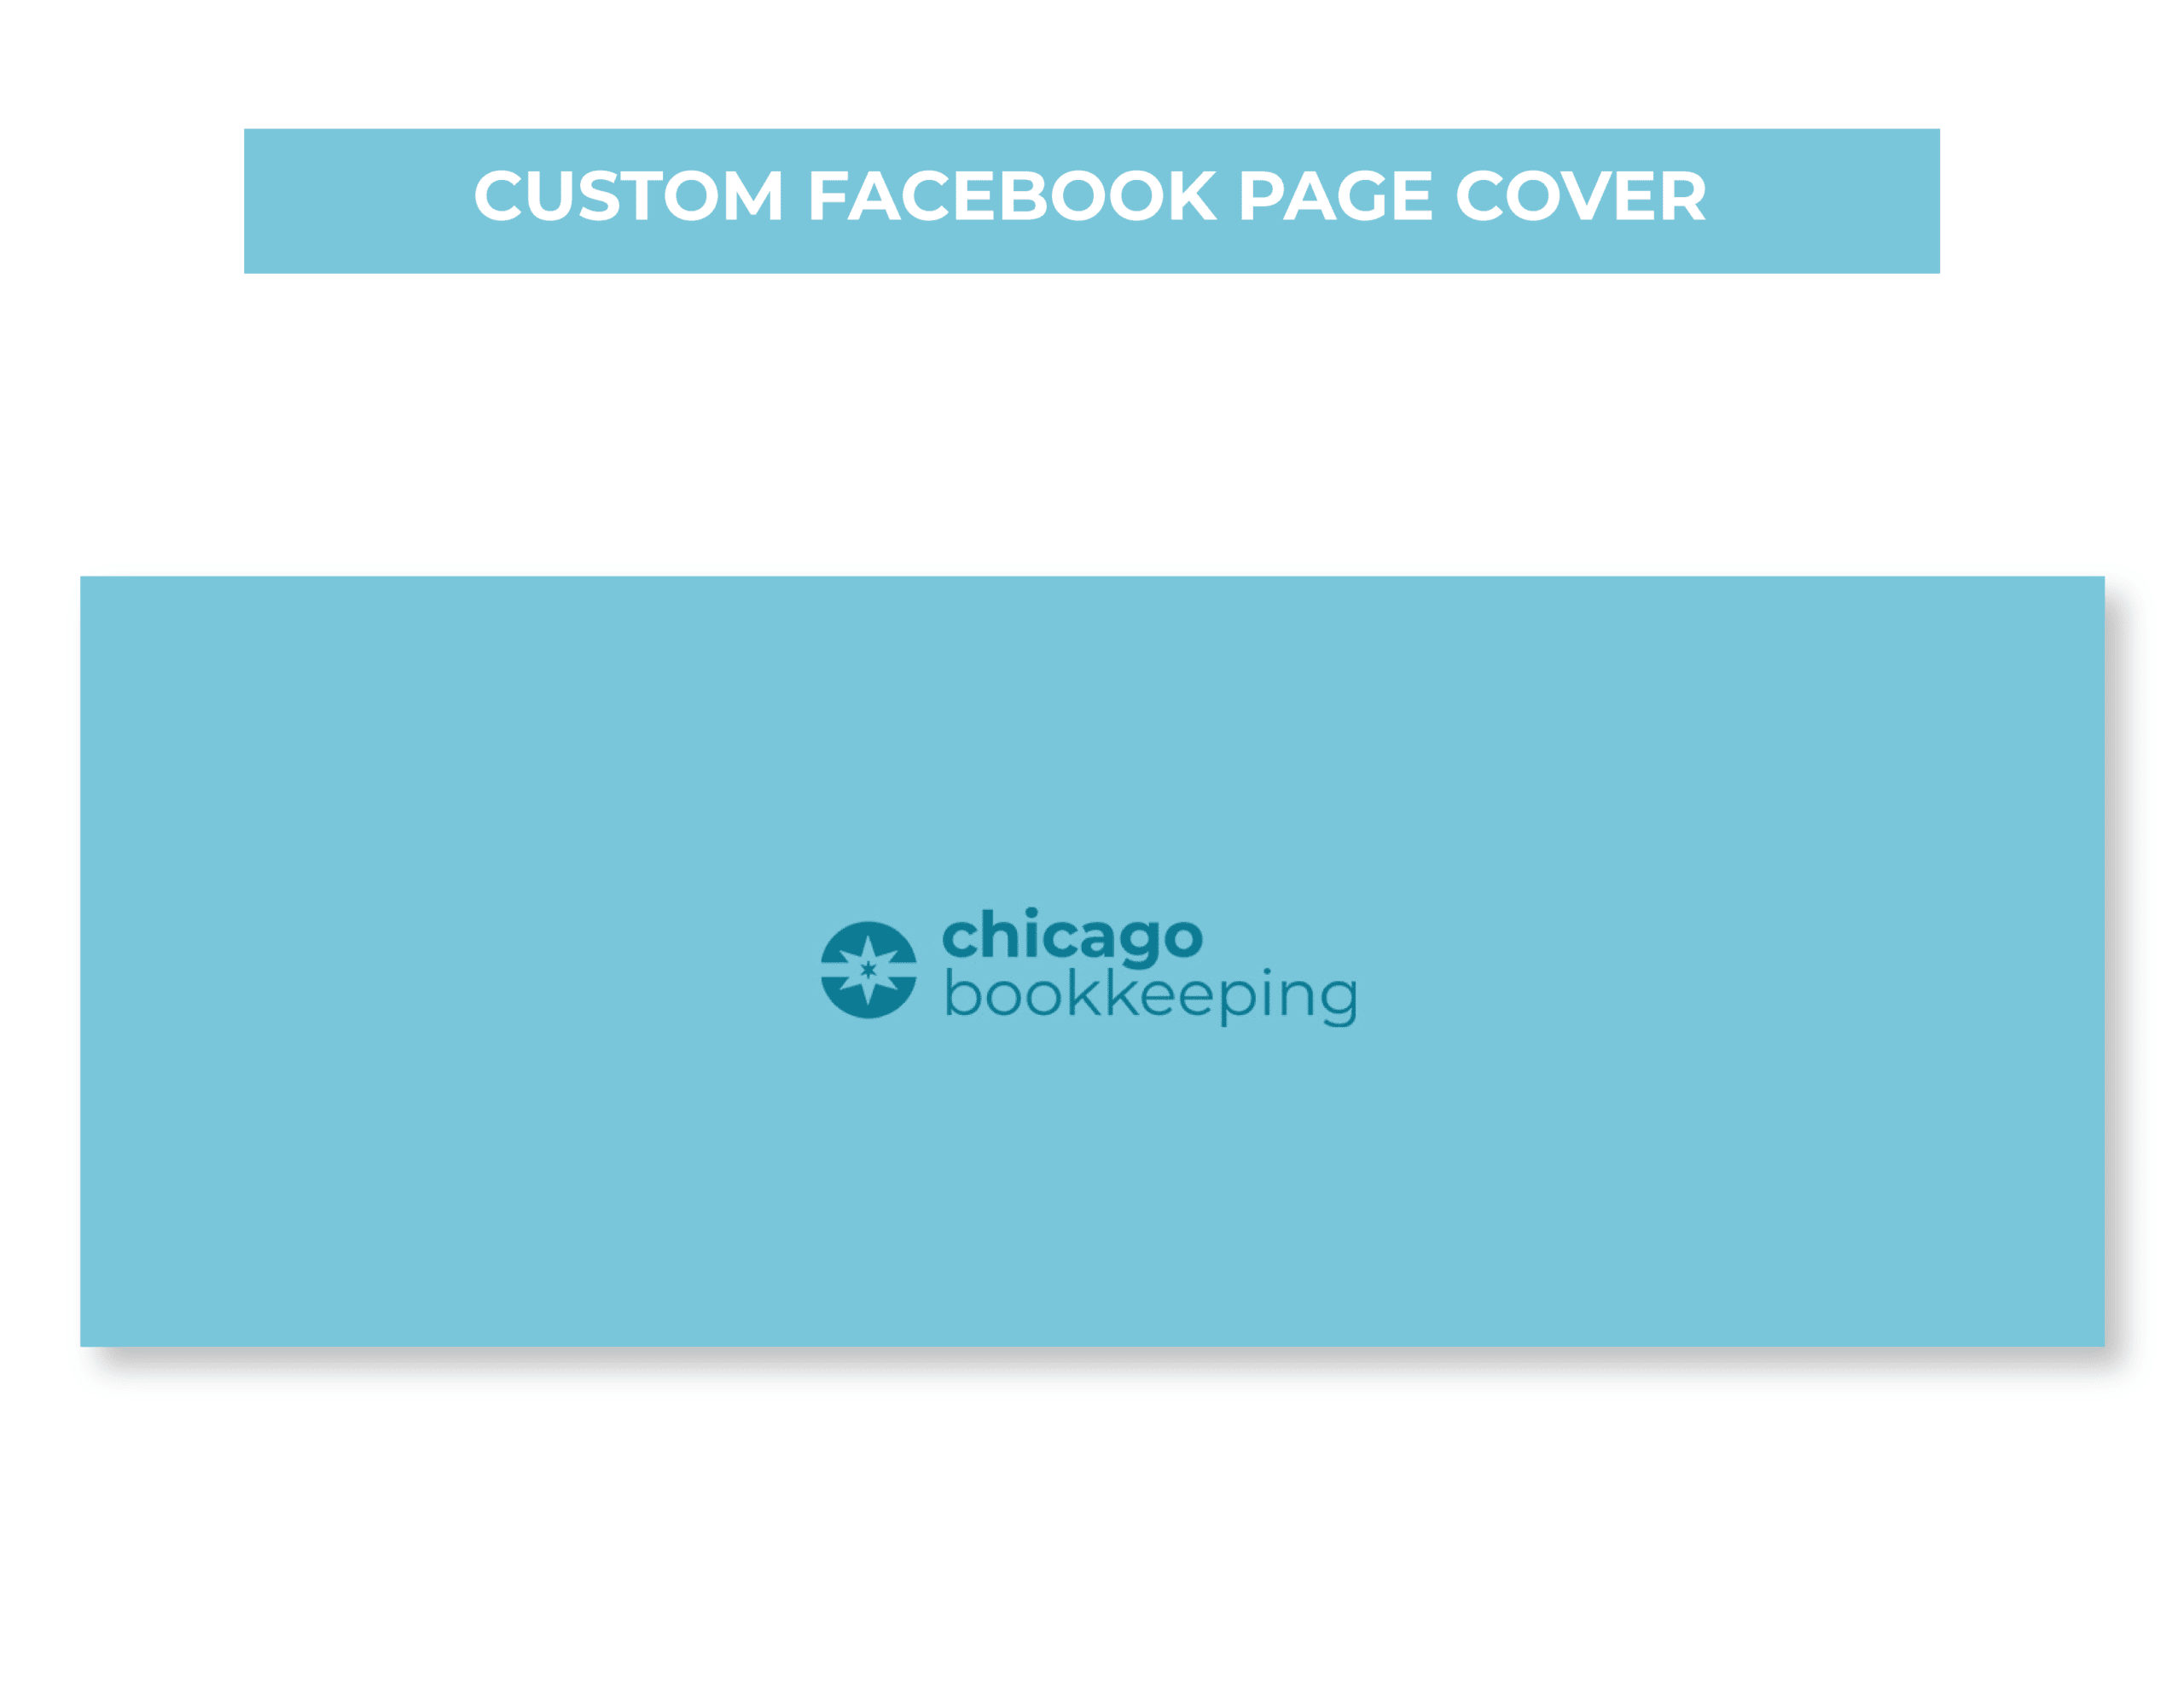 06Chicago_Bookkeeping__Custom Facebook Page Cover